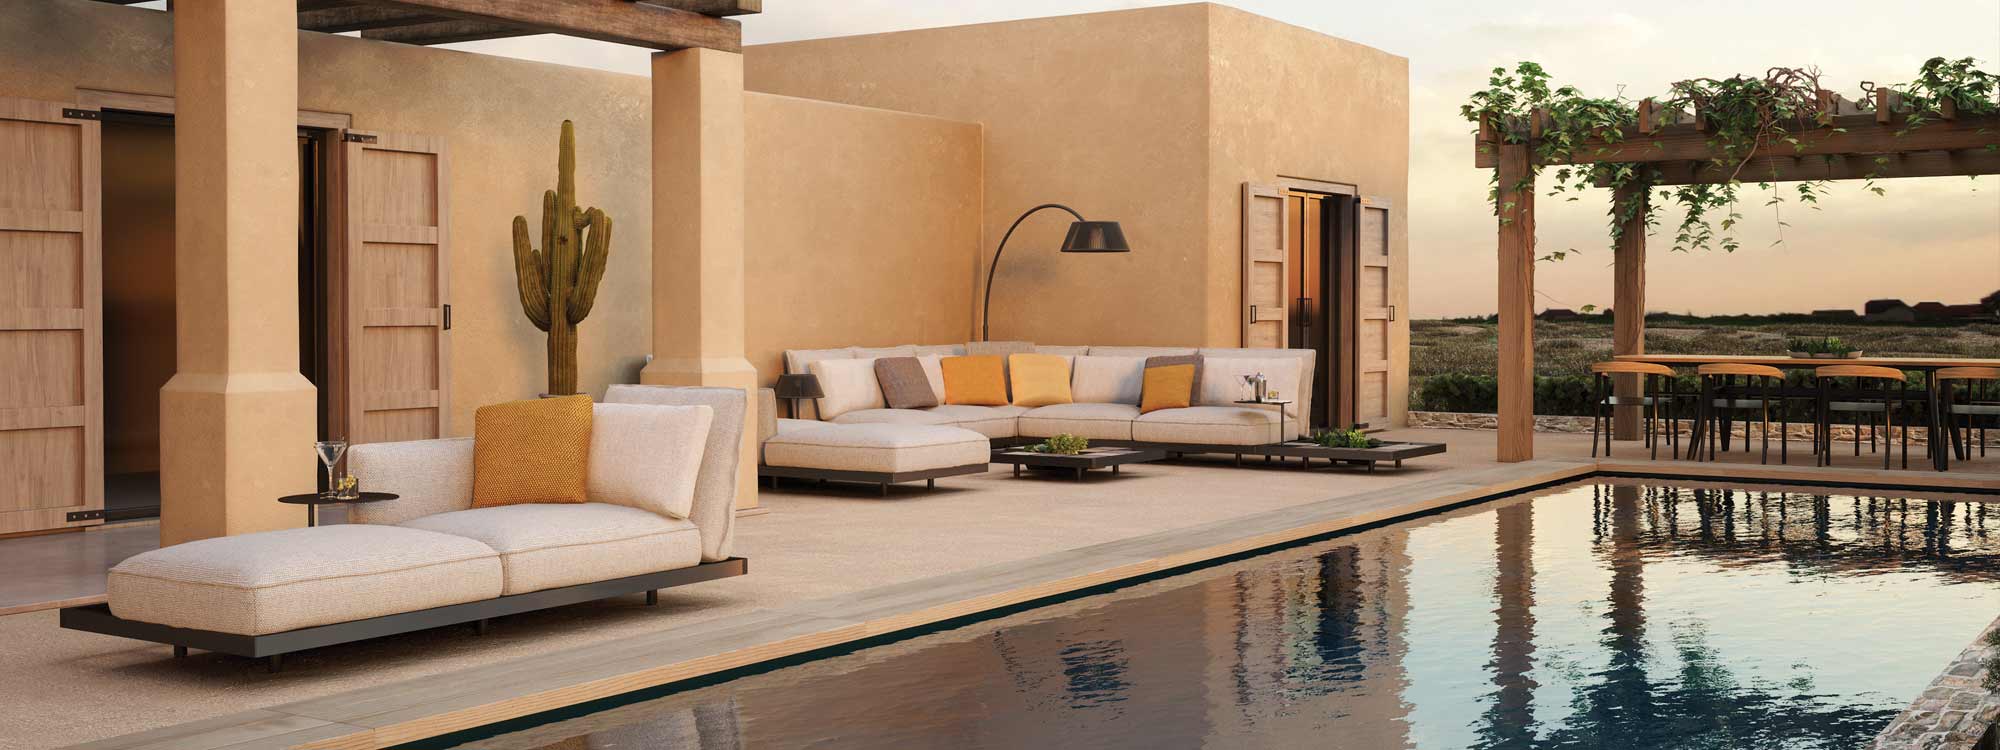 Image of Mozaix Aluminium garden sofa by Royal Botania in terracotta coloured terrace overlooking inviting swimming pool